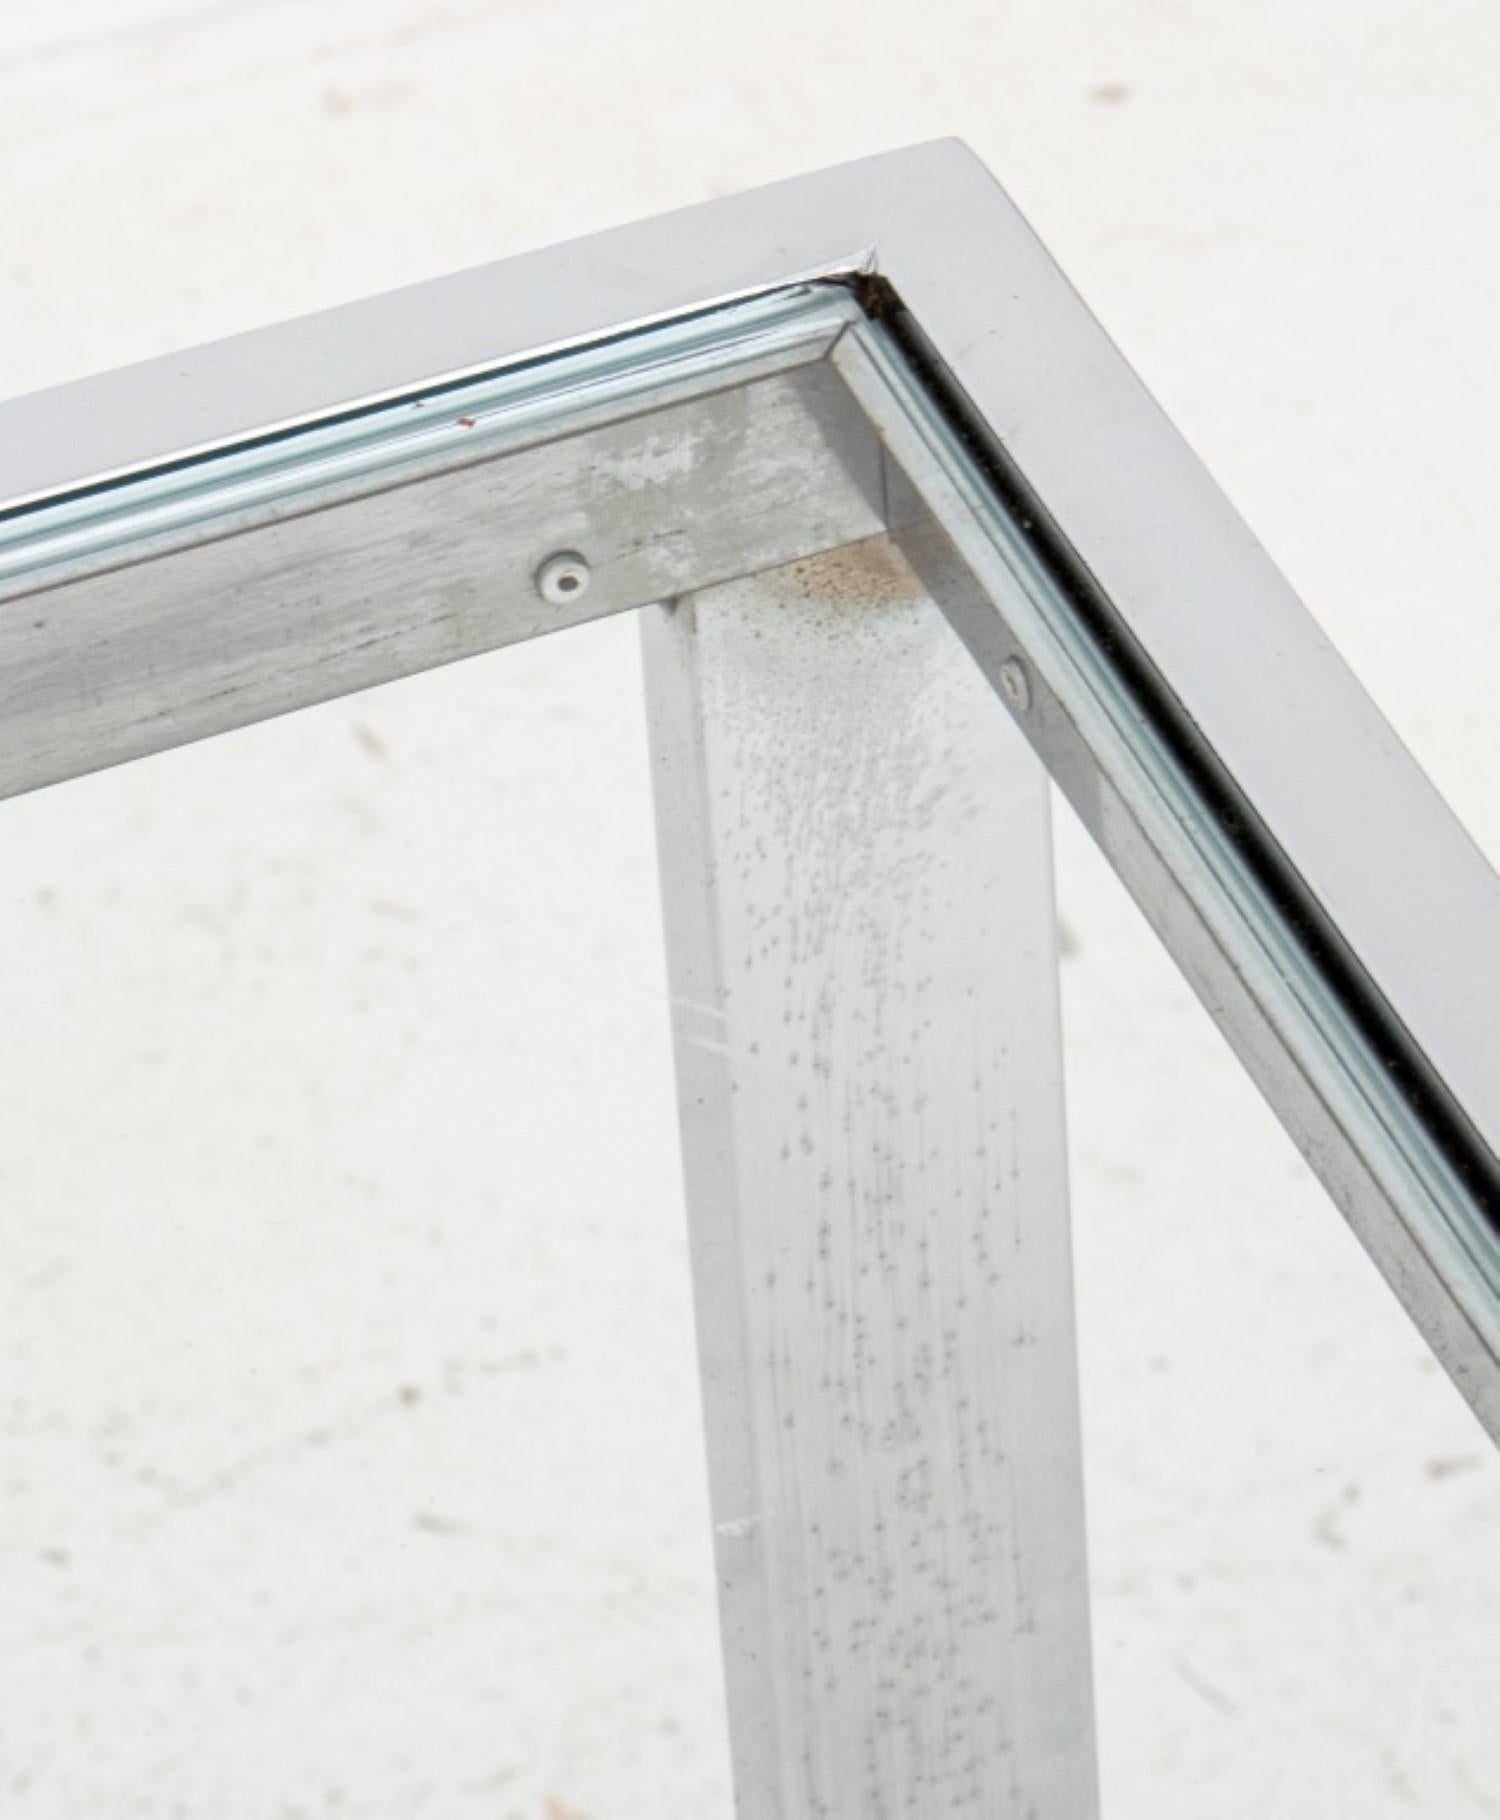 The dimensions for the Knoll Style Chrome and Glass Table are approximately:

Height: 28